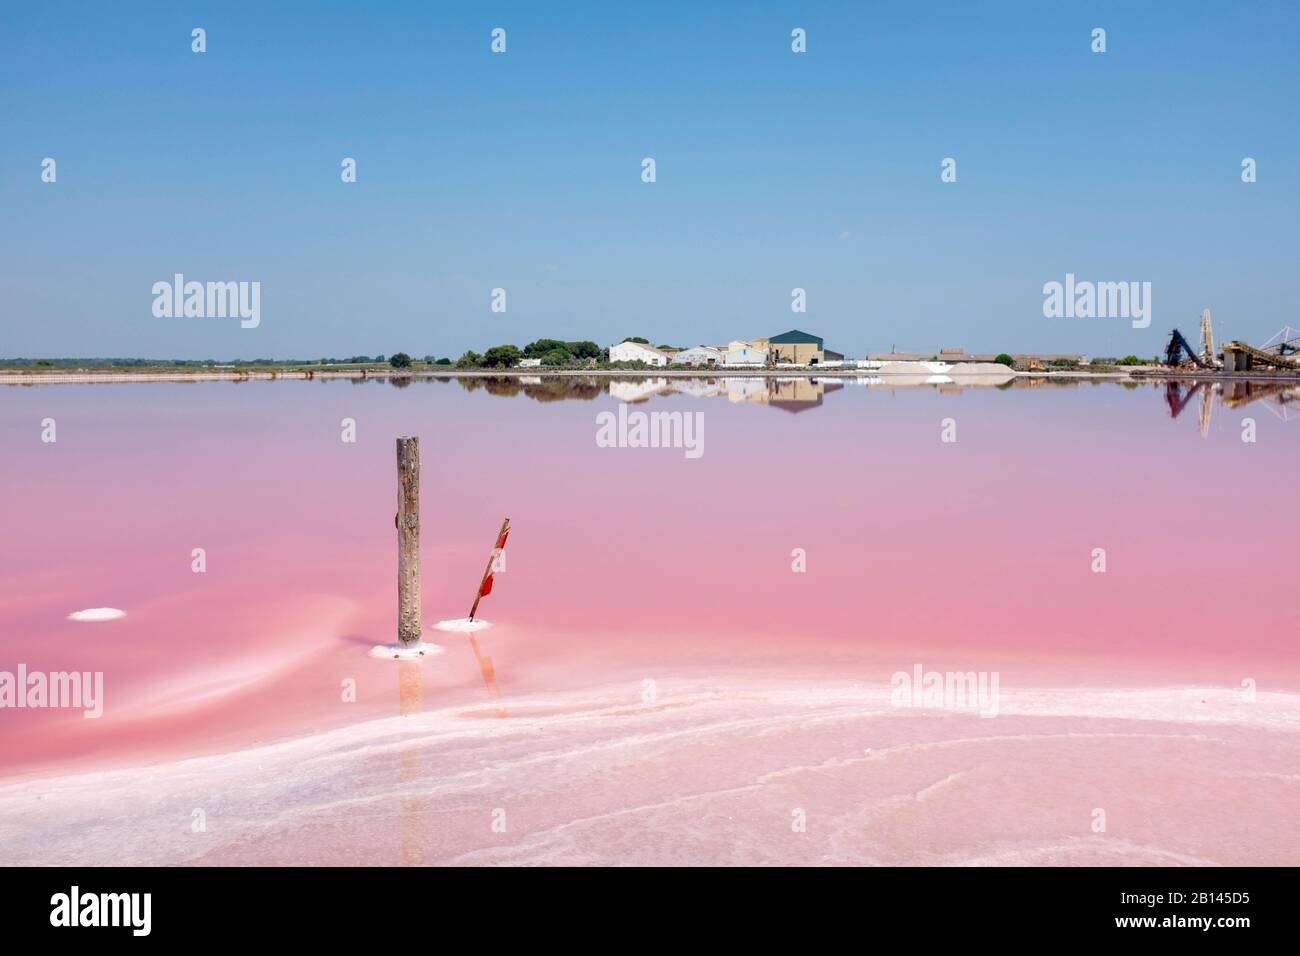 Aigues-Mortes salt marshes, Camargue, Southern France Stock Photo